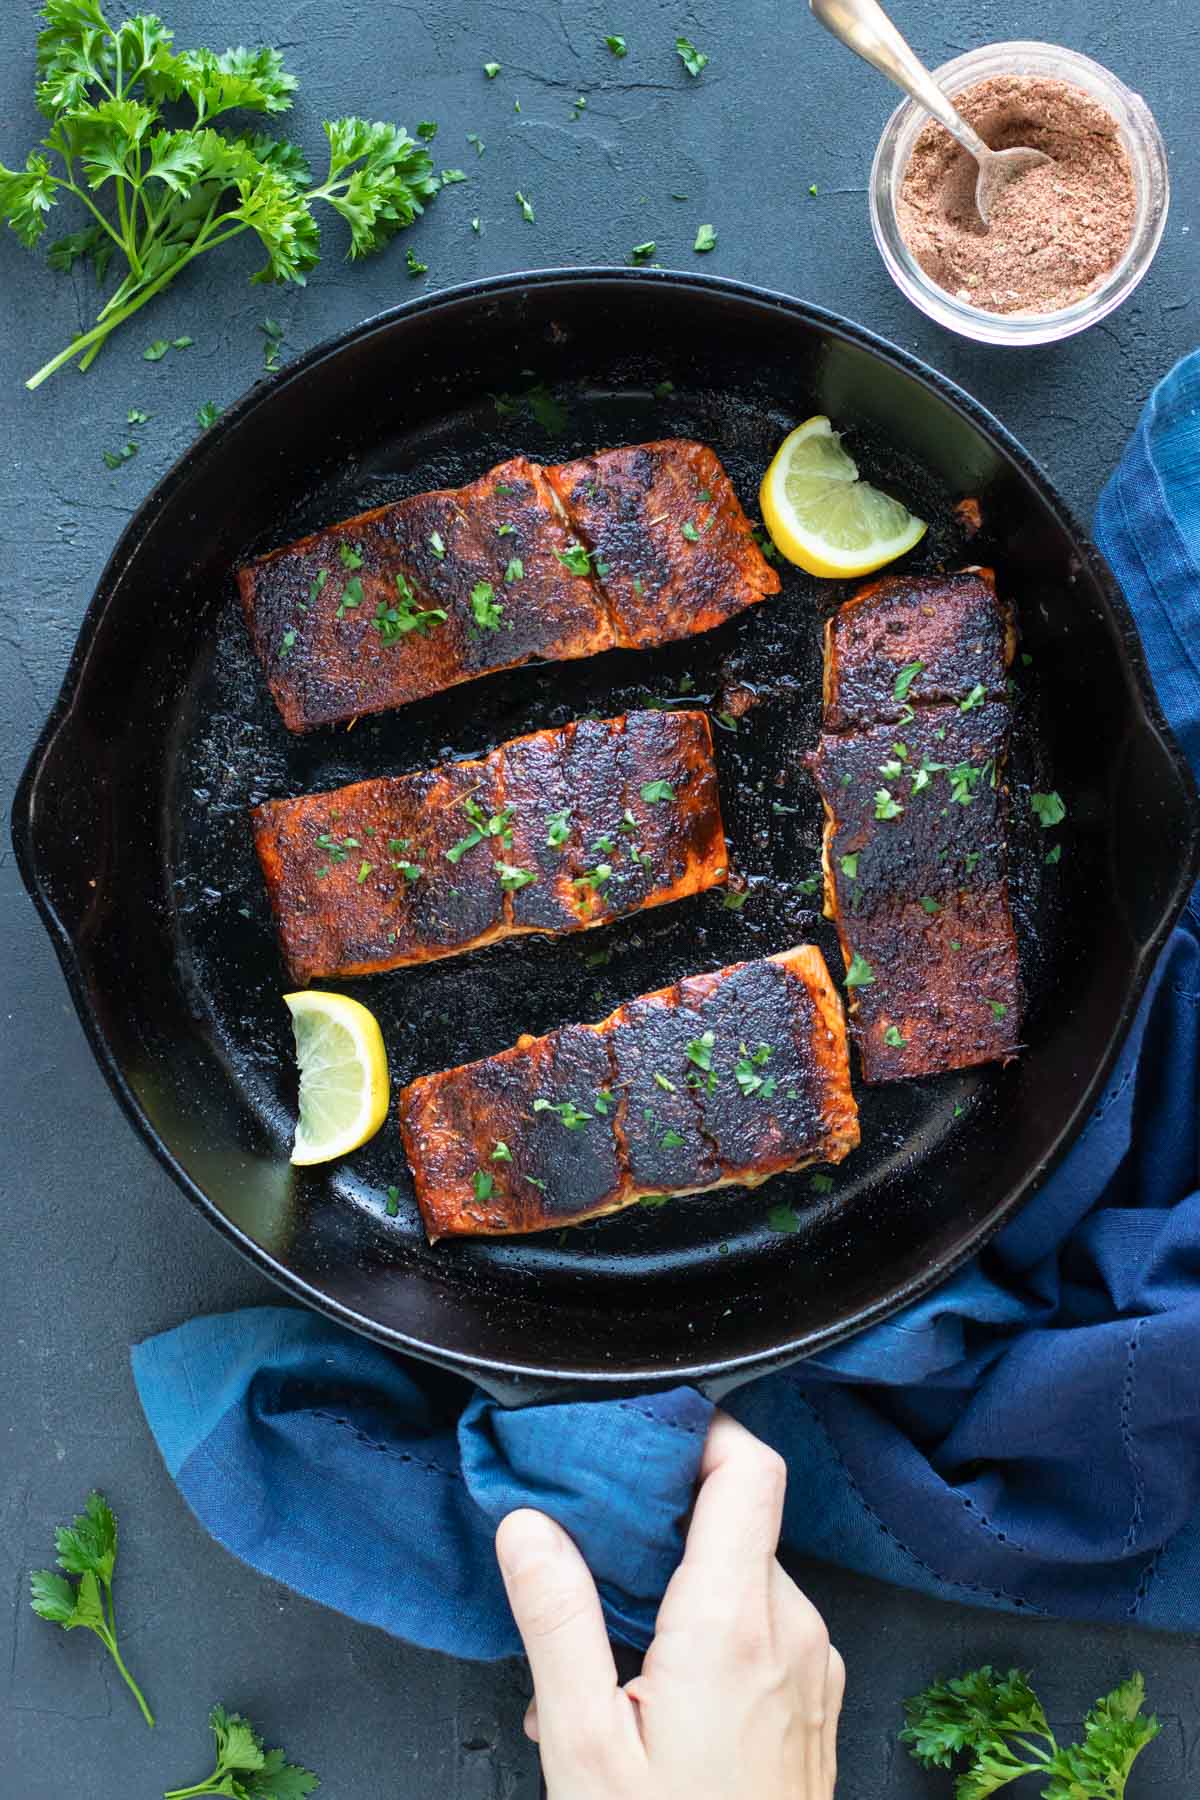 Blackened salmon recipe in a black cast iron skillet with a bowl full of blackened seasoning next to it.